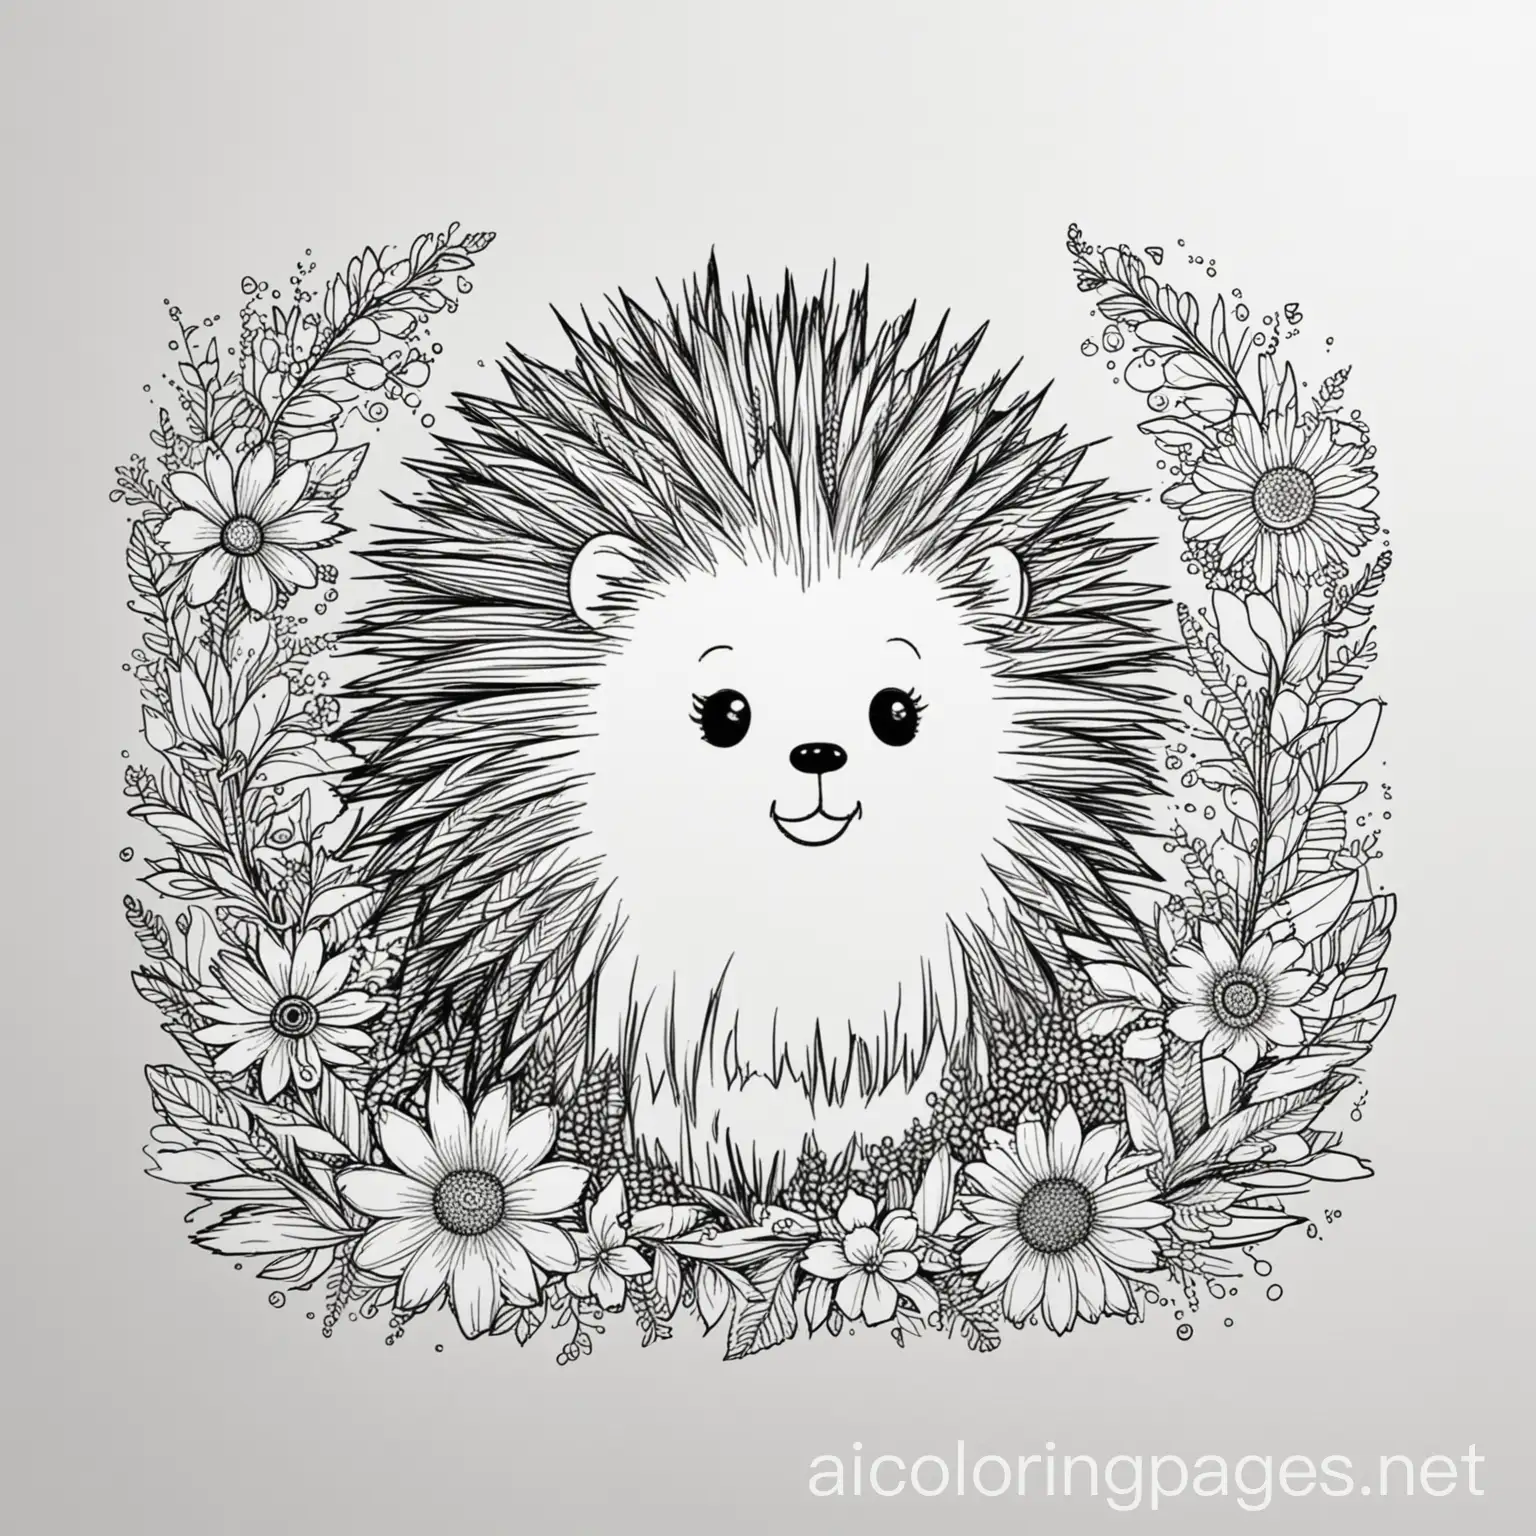 porcupine with flowers, Coloring Page, black and white, line art, white background, Simplicity, Ample White Space, Coloring Page, black and white, line art, white background, Simplicity, Ample White Space. The background of the coloring page is plain white to make it easy for young children to color within the lines. The outlines of all the subjects are easy to distinguish, making it simple for kids to color without too much difficulty